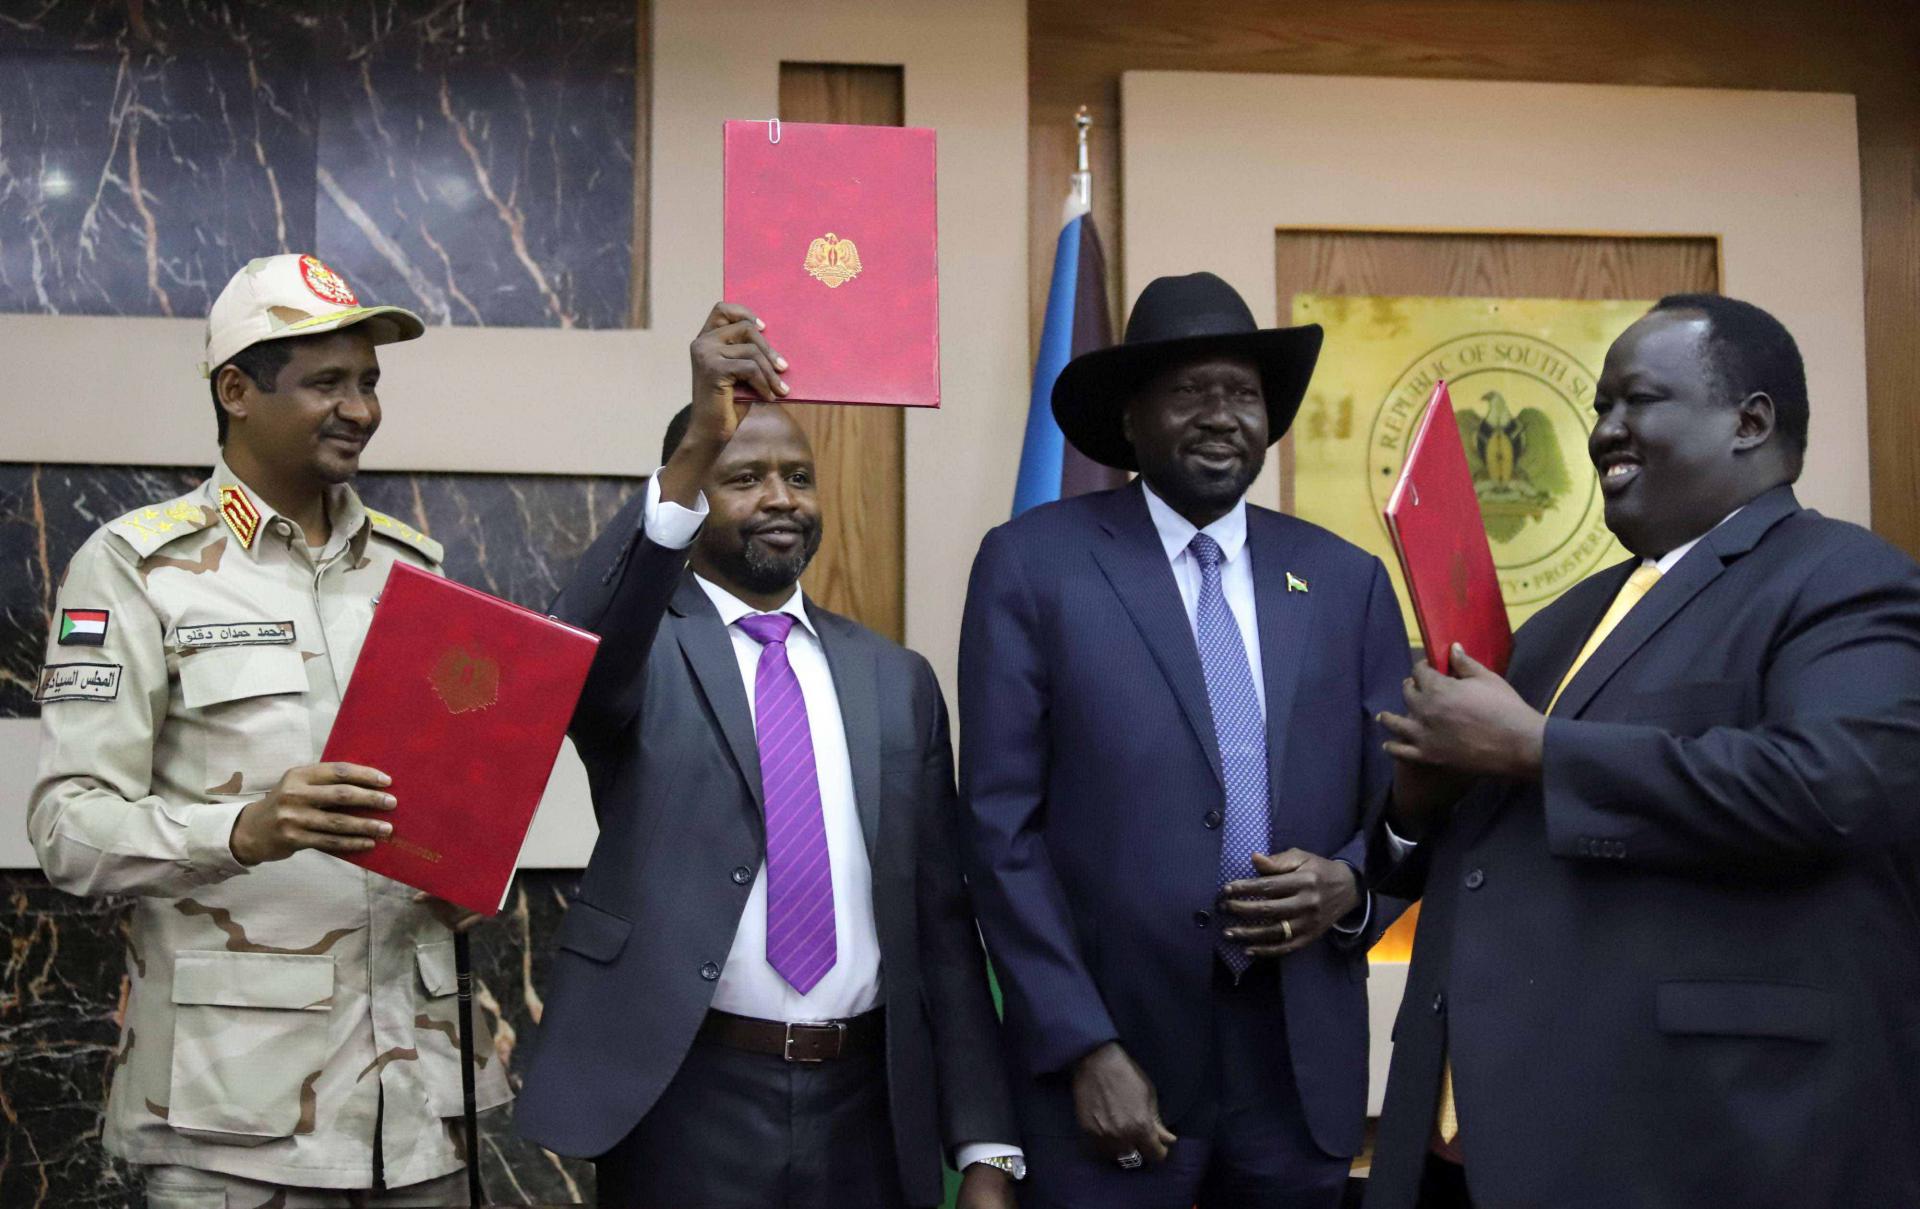 The peace talks have been held in the capital of South Sudan after its President, Salva Kiir, volunteered to mediate